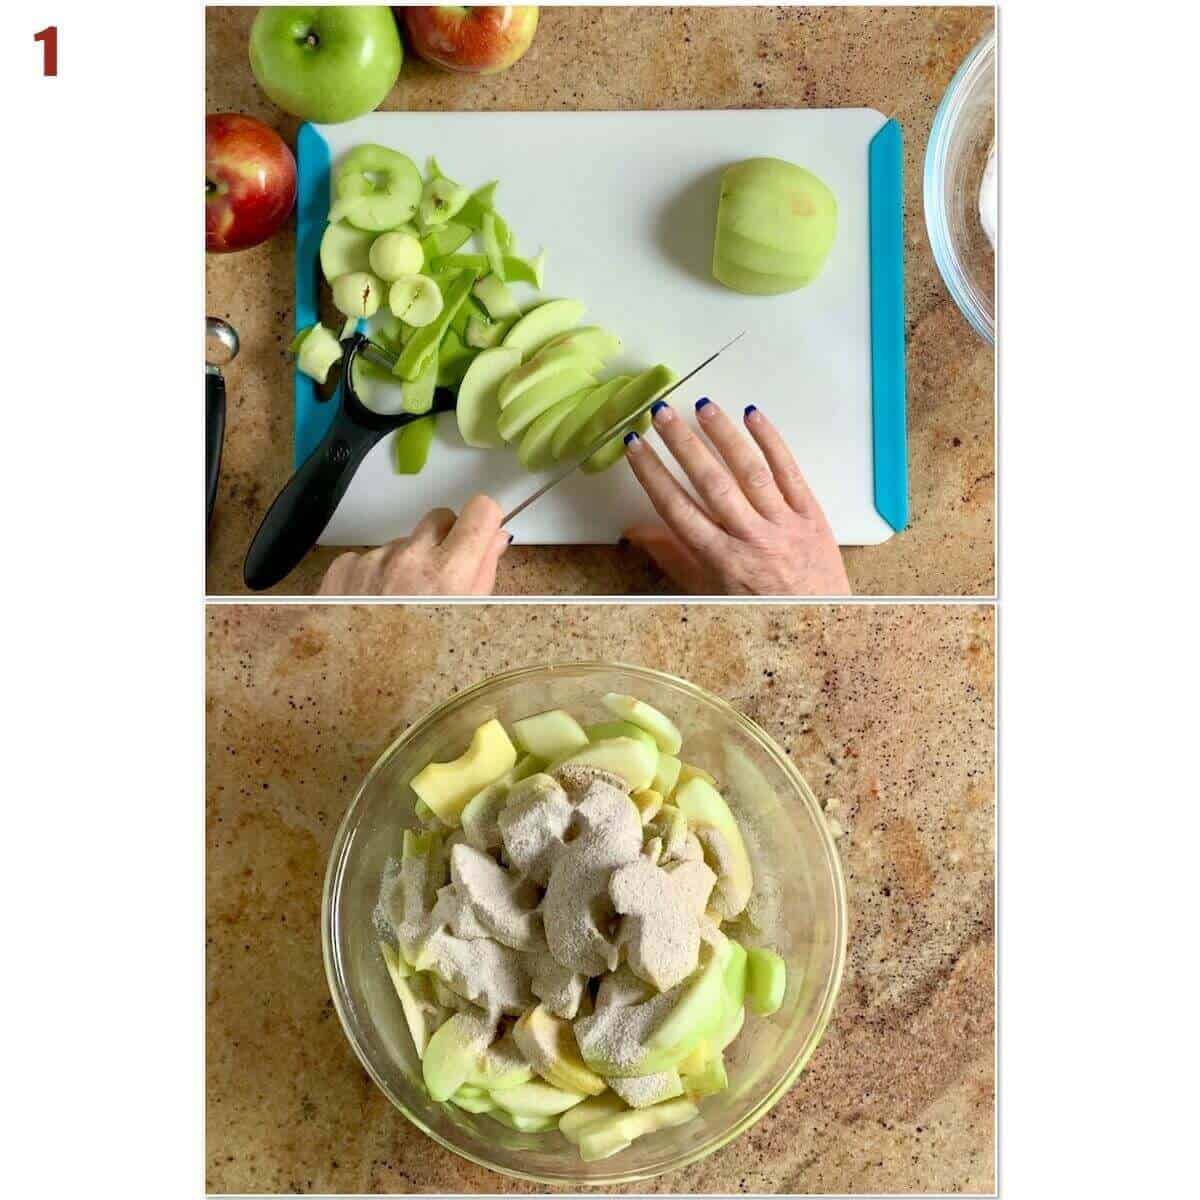 Collage of slicing apples on a cutting board and in glass bowl sprinkled with spices.